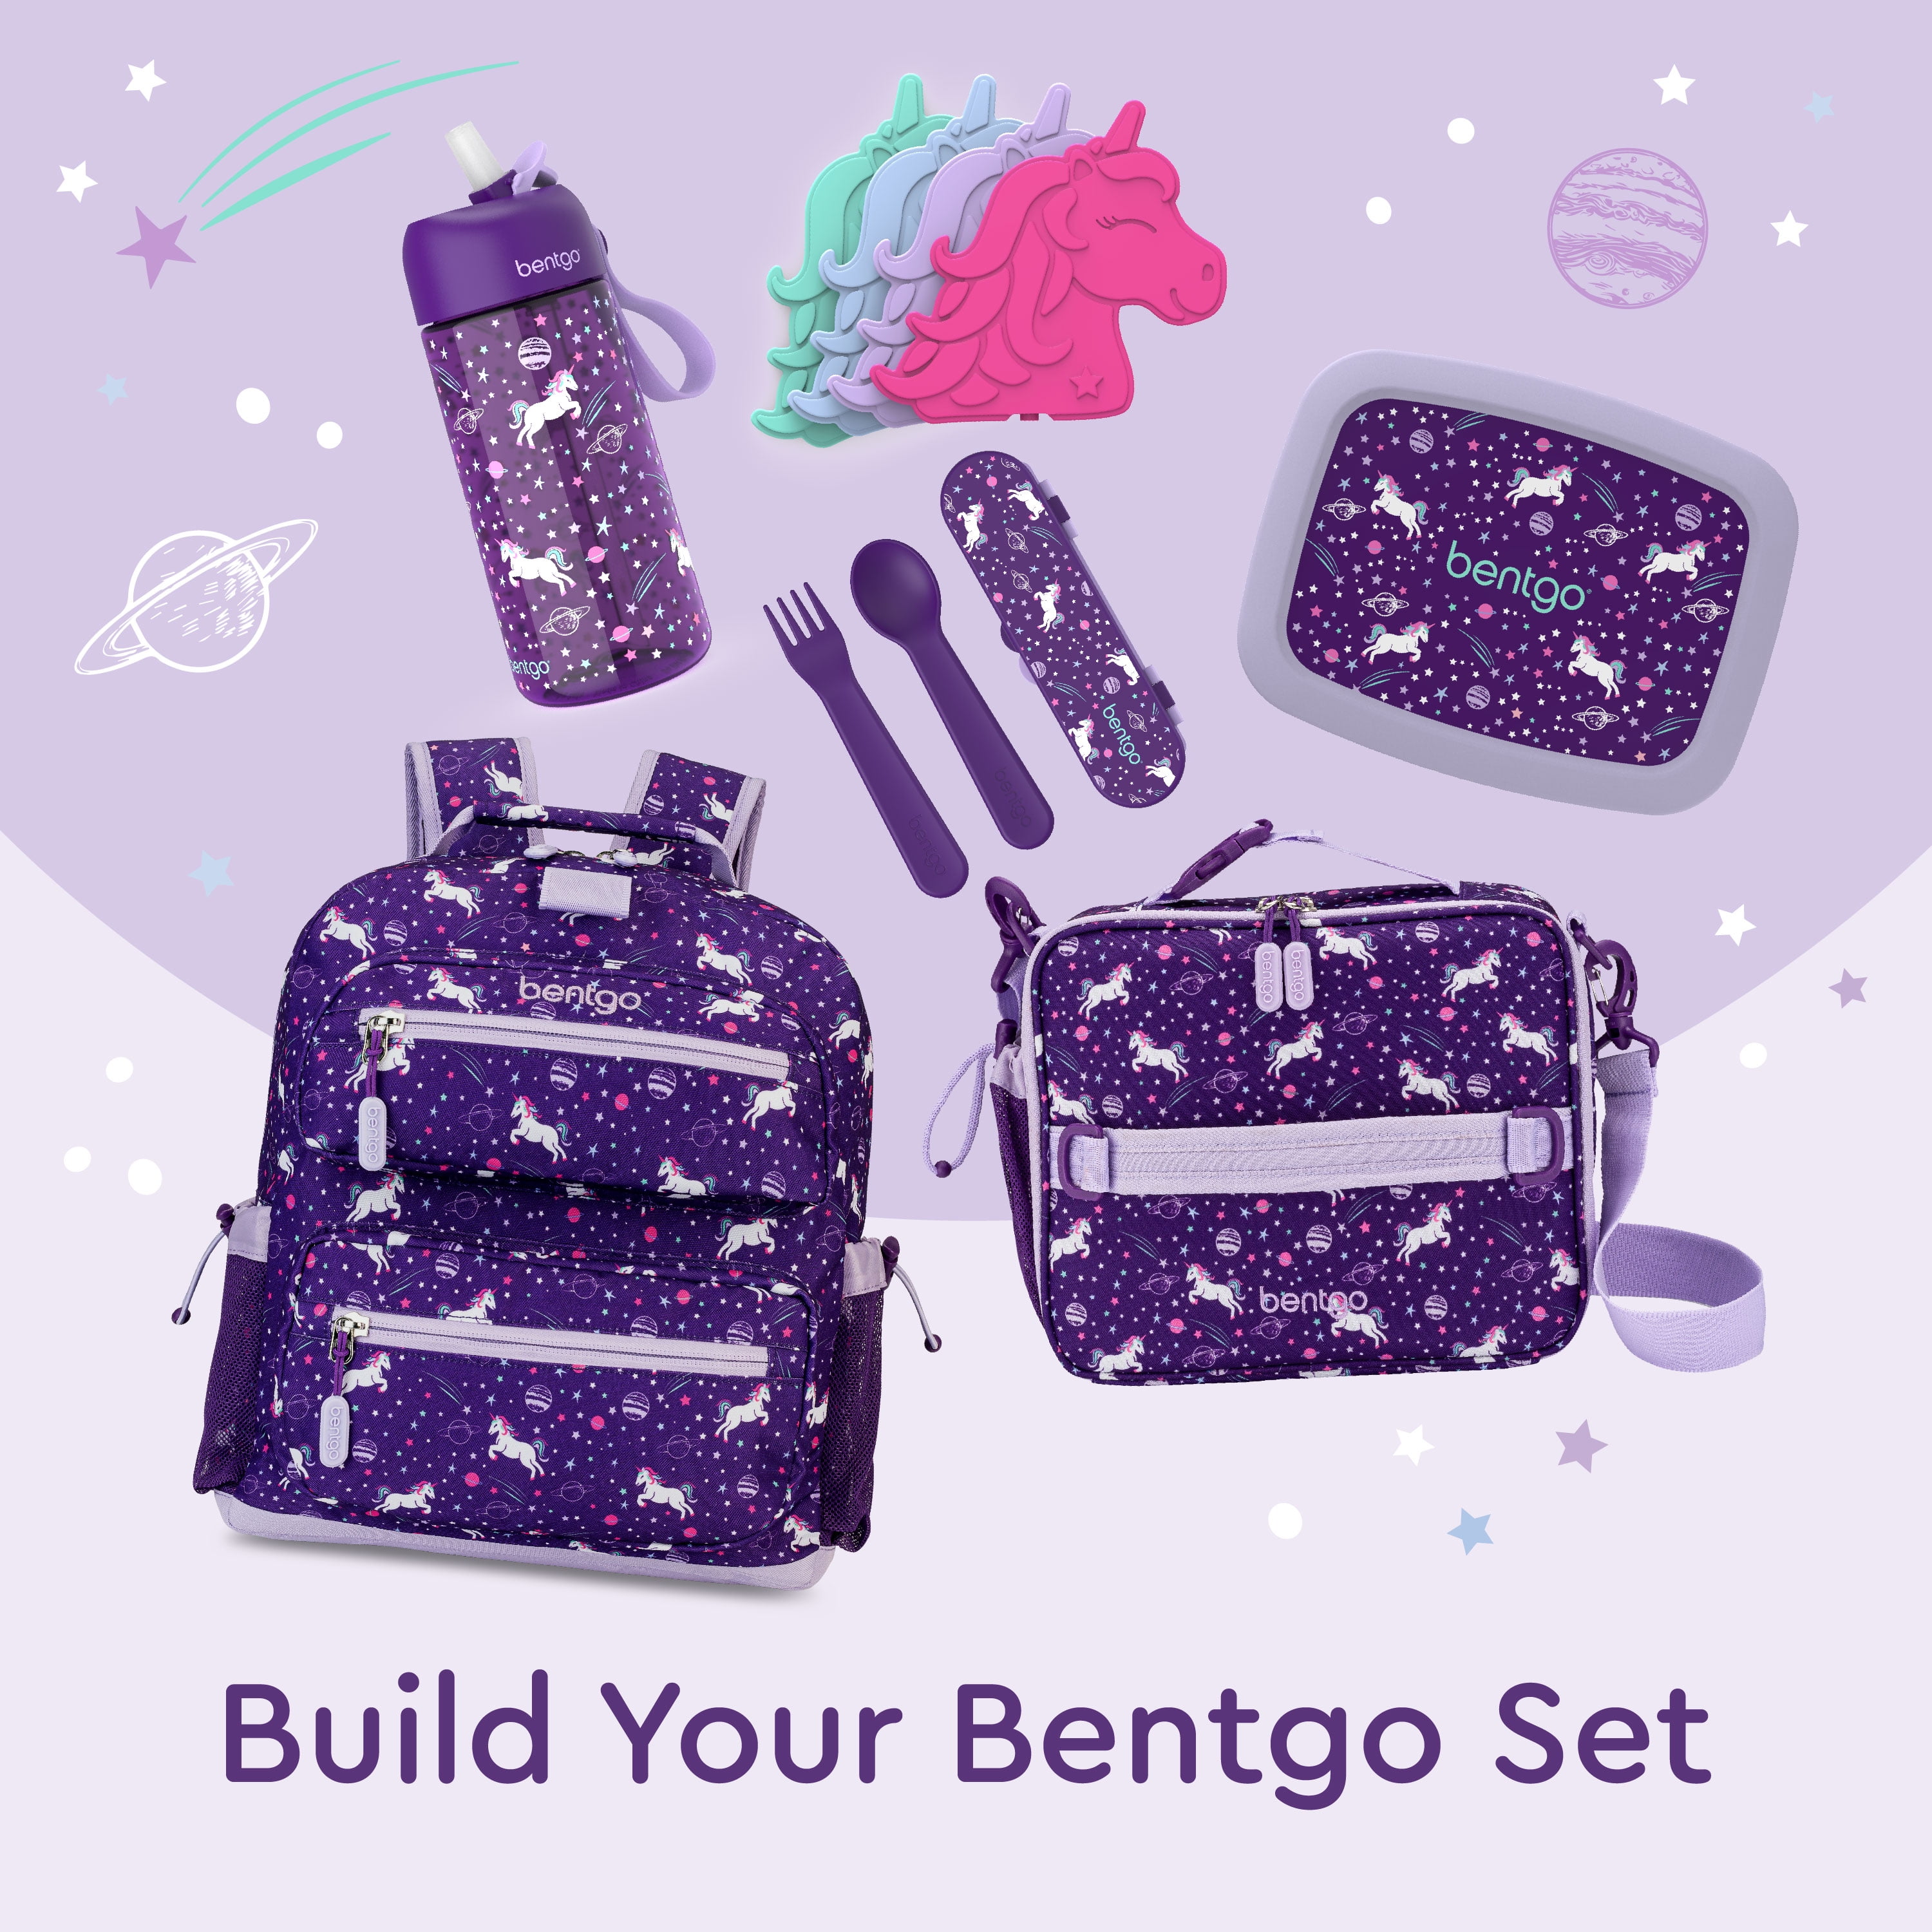 Bentgo Kids Backpack - Confetti Edition Designed Lightweight 14” Backpack for School, Travel & Daycare - Roomy Interior, Durable & Water-Resistant